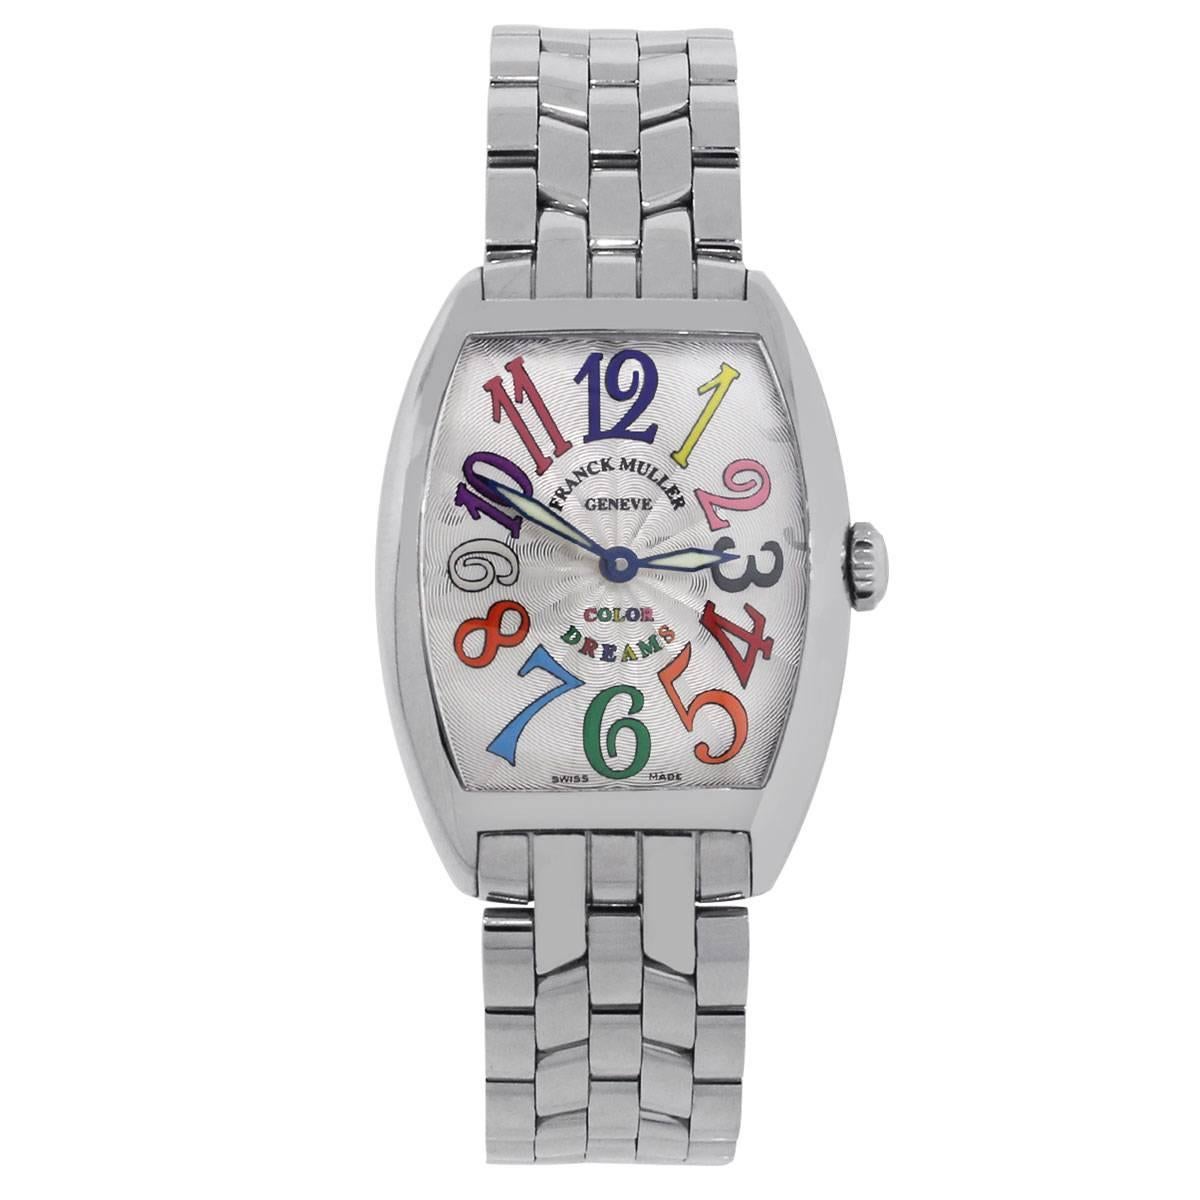 Brand: Franck Muller
MPN: Number 2052
Model: Color Dreams
Case Material: Stainless Steel
Case Diameter: 29mm
Crystal: Scratch resistant sapphire
Bezel: Stainless steel smooth fixed bezel
Dial: Guilloché dial with multi color numerals. Luminescent